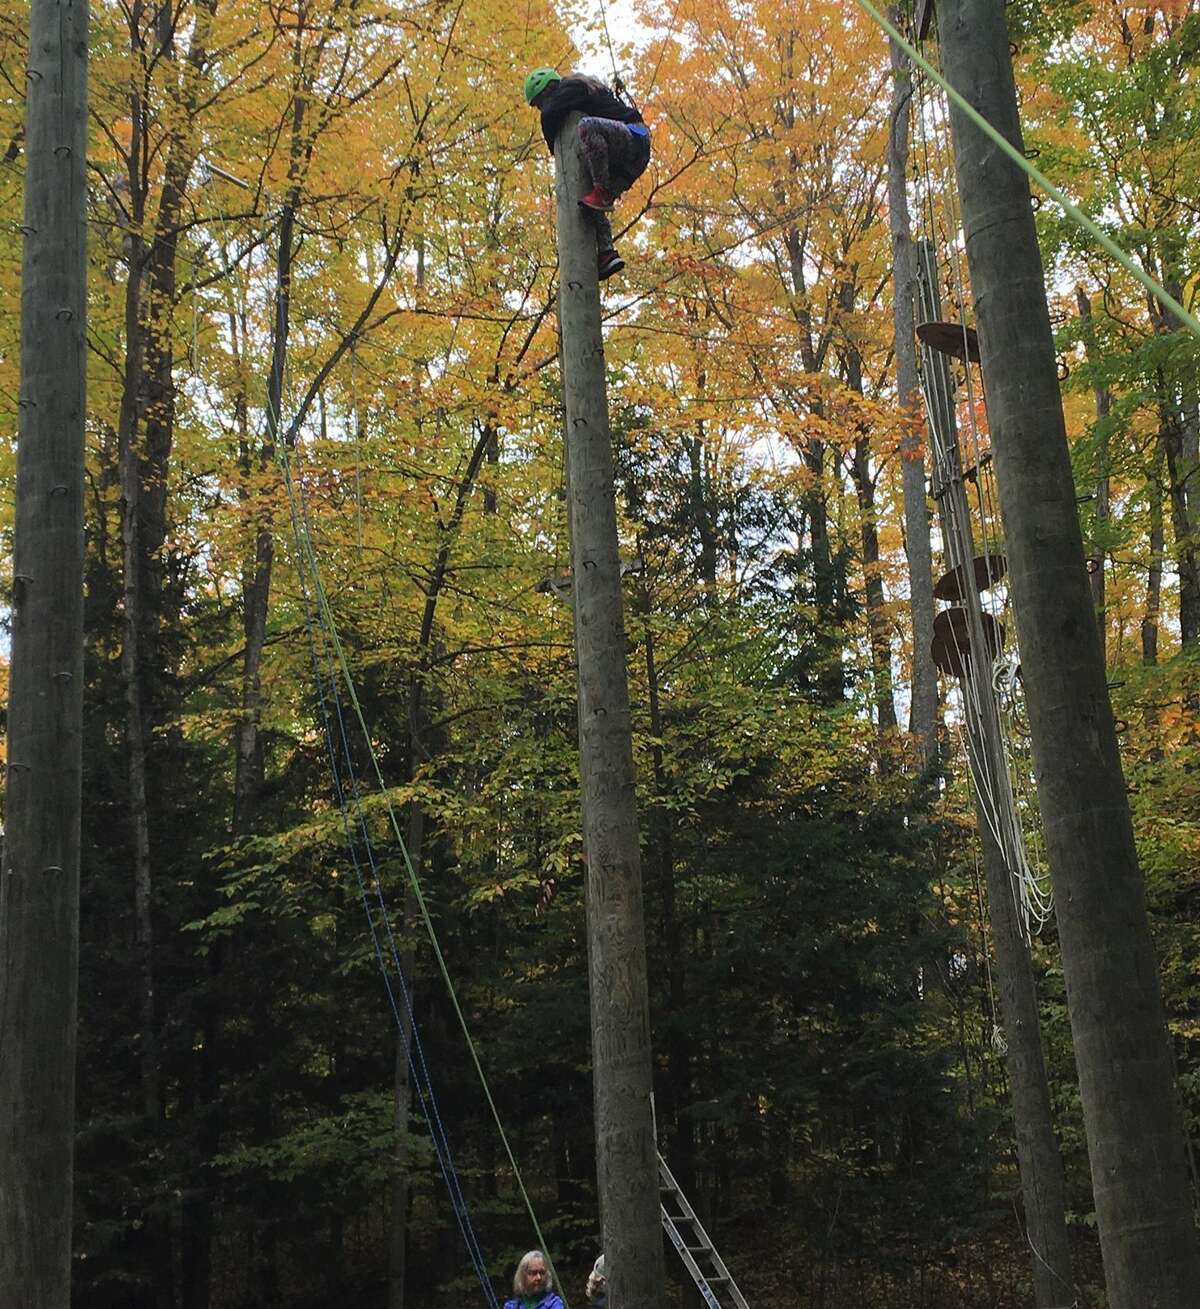 CASMAN Academy student Heaven Blair scales a wooden pole at Camp Daggett in Petoskey as part of the Jobs for Michigan's Graduates Leadership Day on Oct. 27.